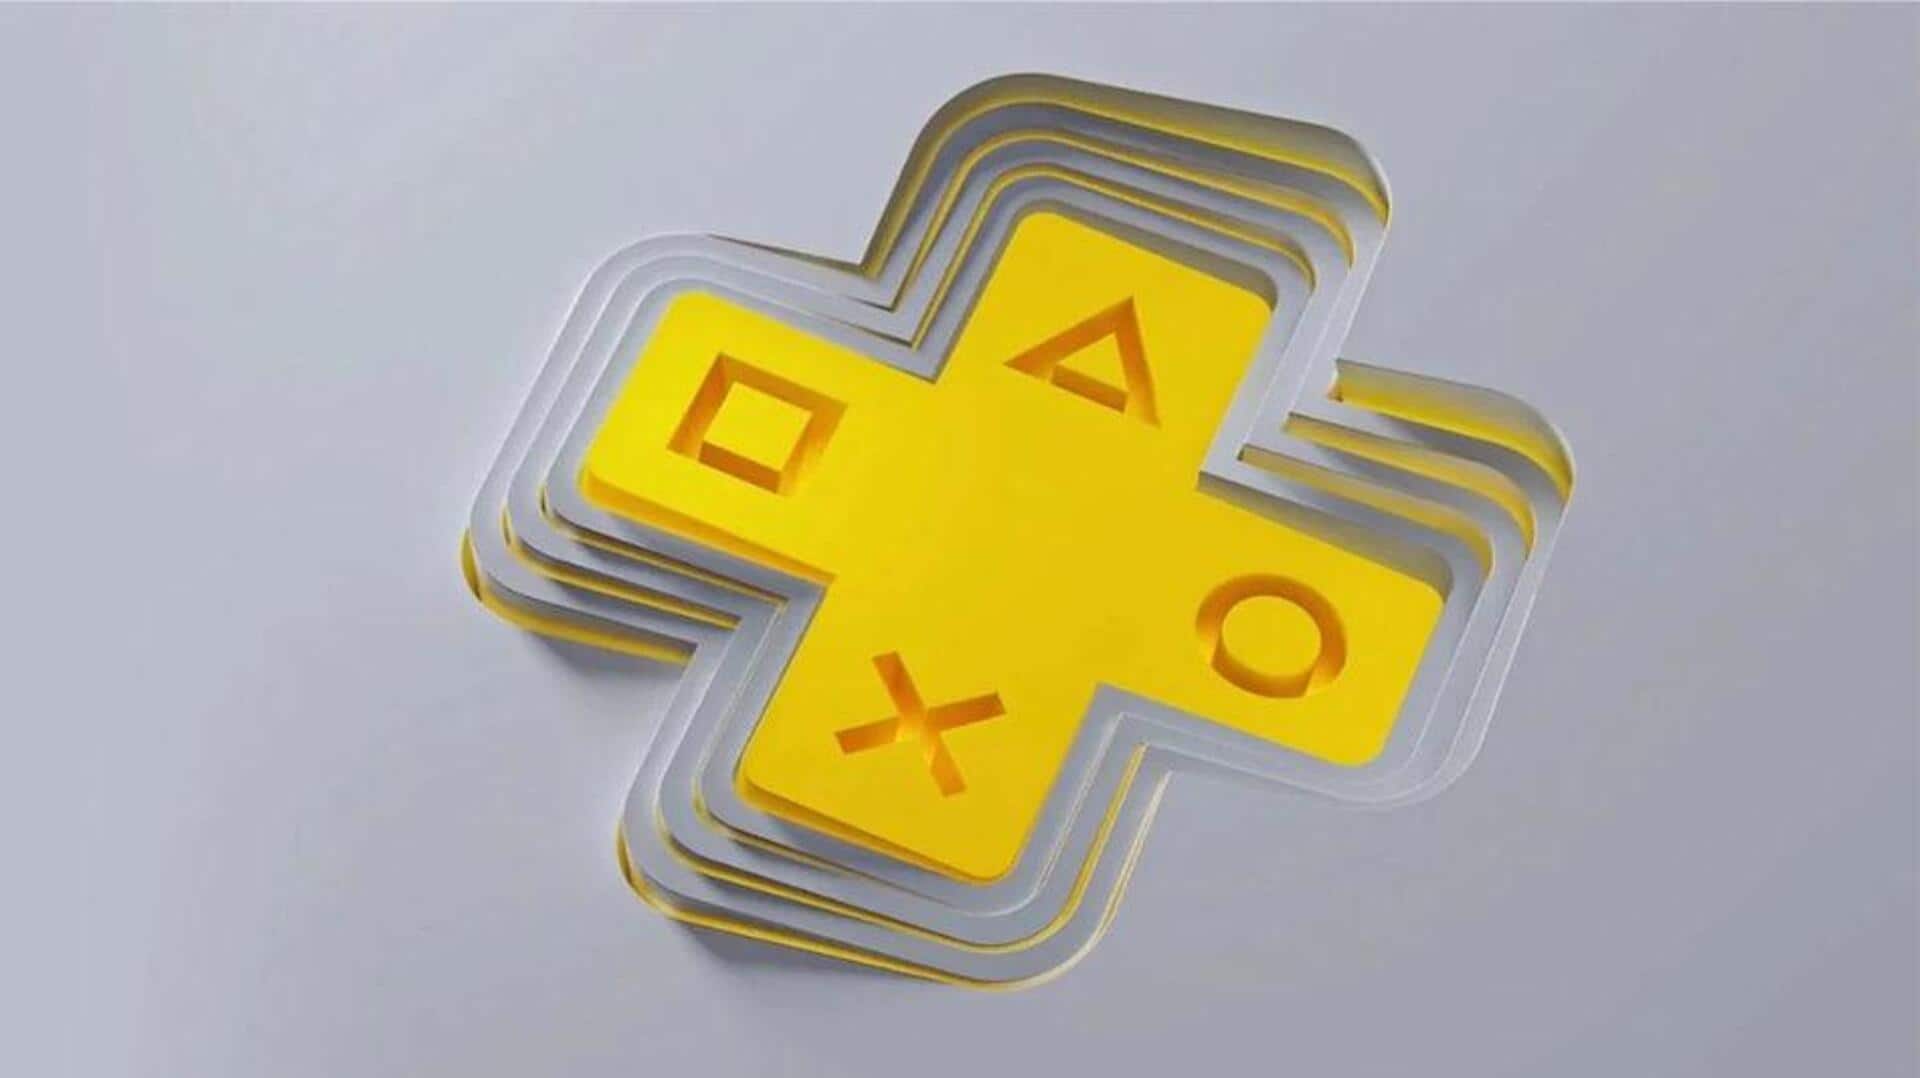 Sony PlayStation Plus yearly subscriptions become costlier: Check new prices